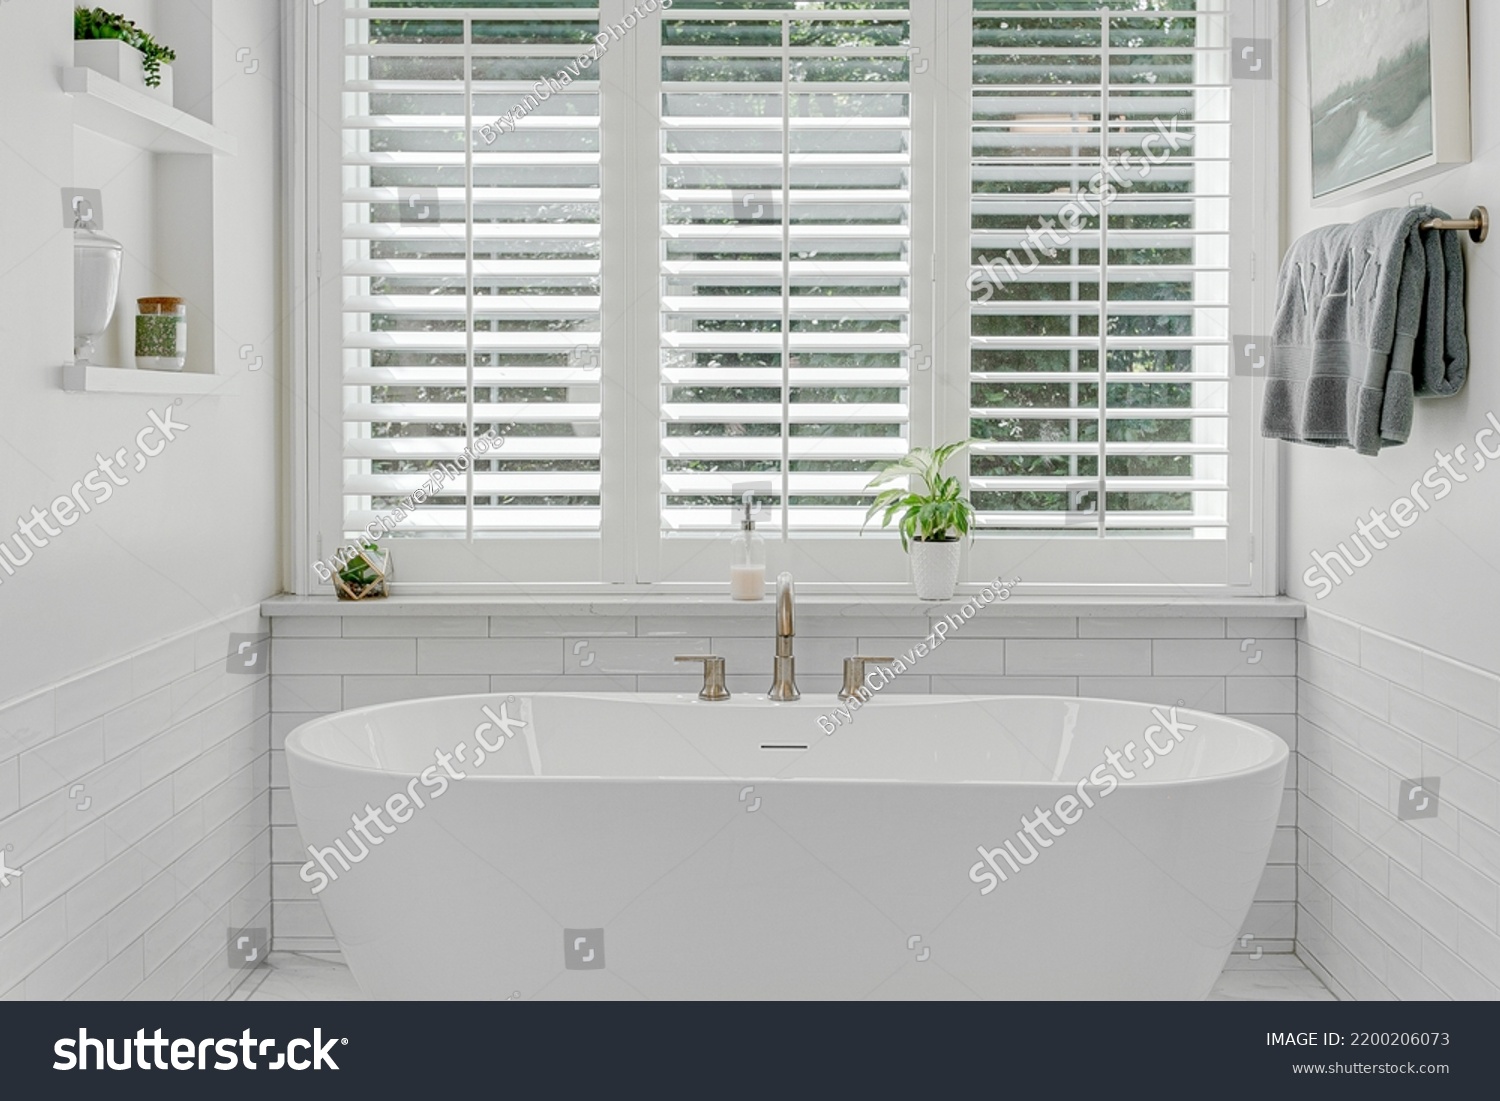 Modern luxury soaking tub with brass faucet interior design staged with plantation shutters #2200206073